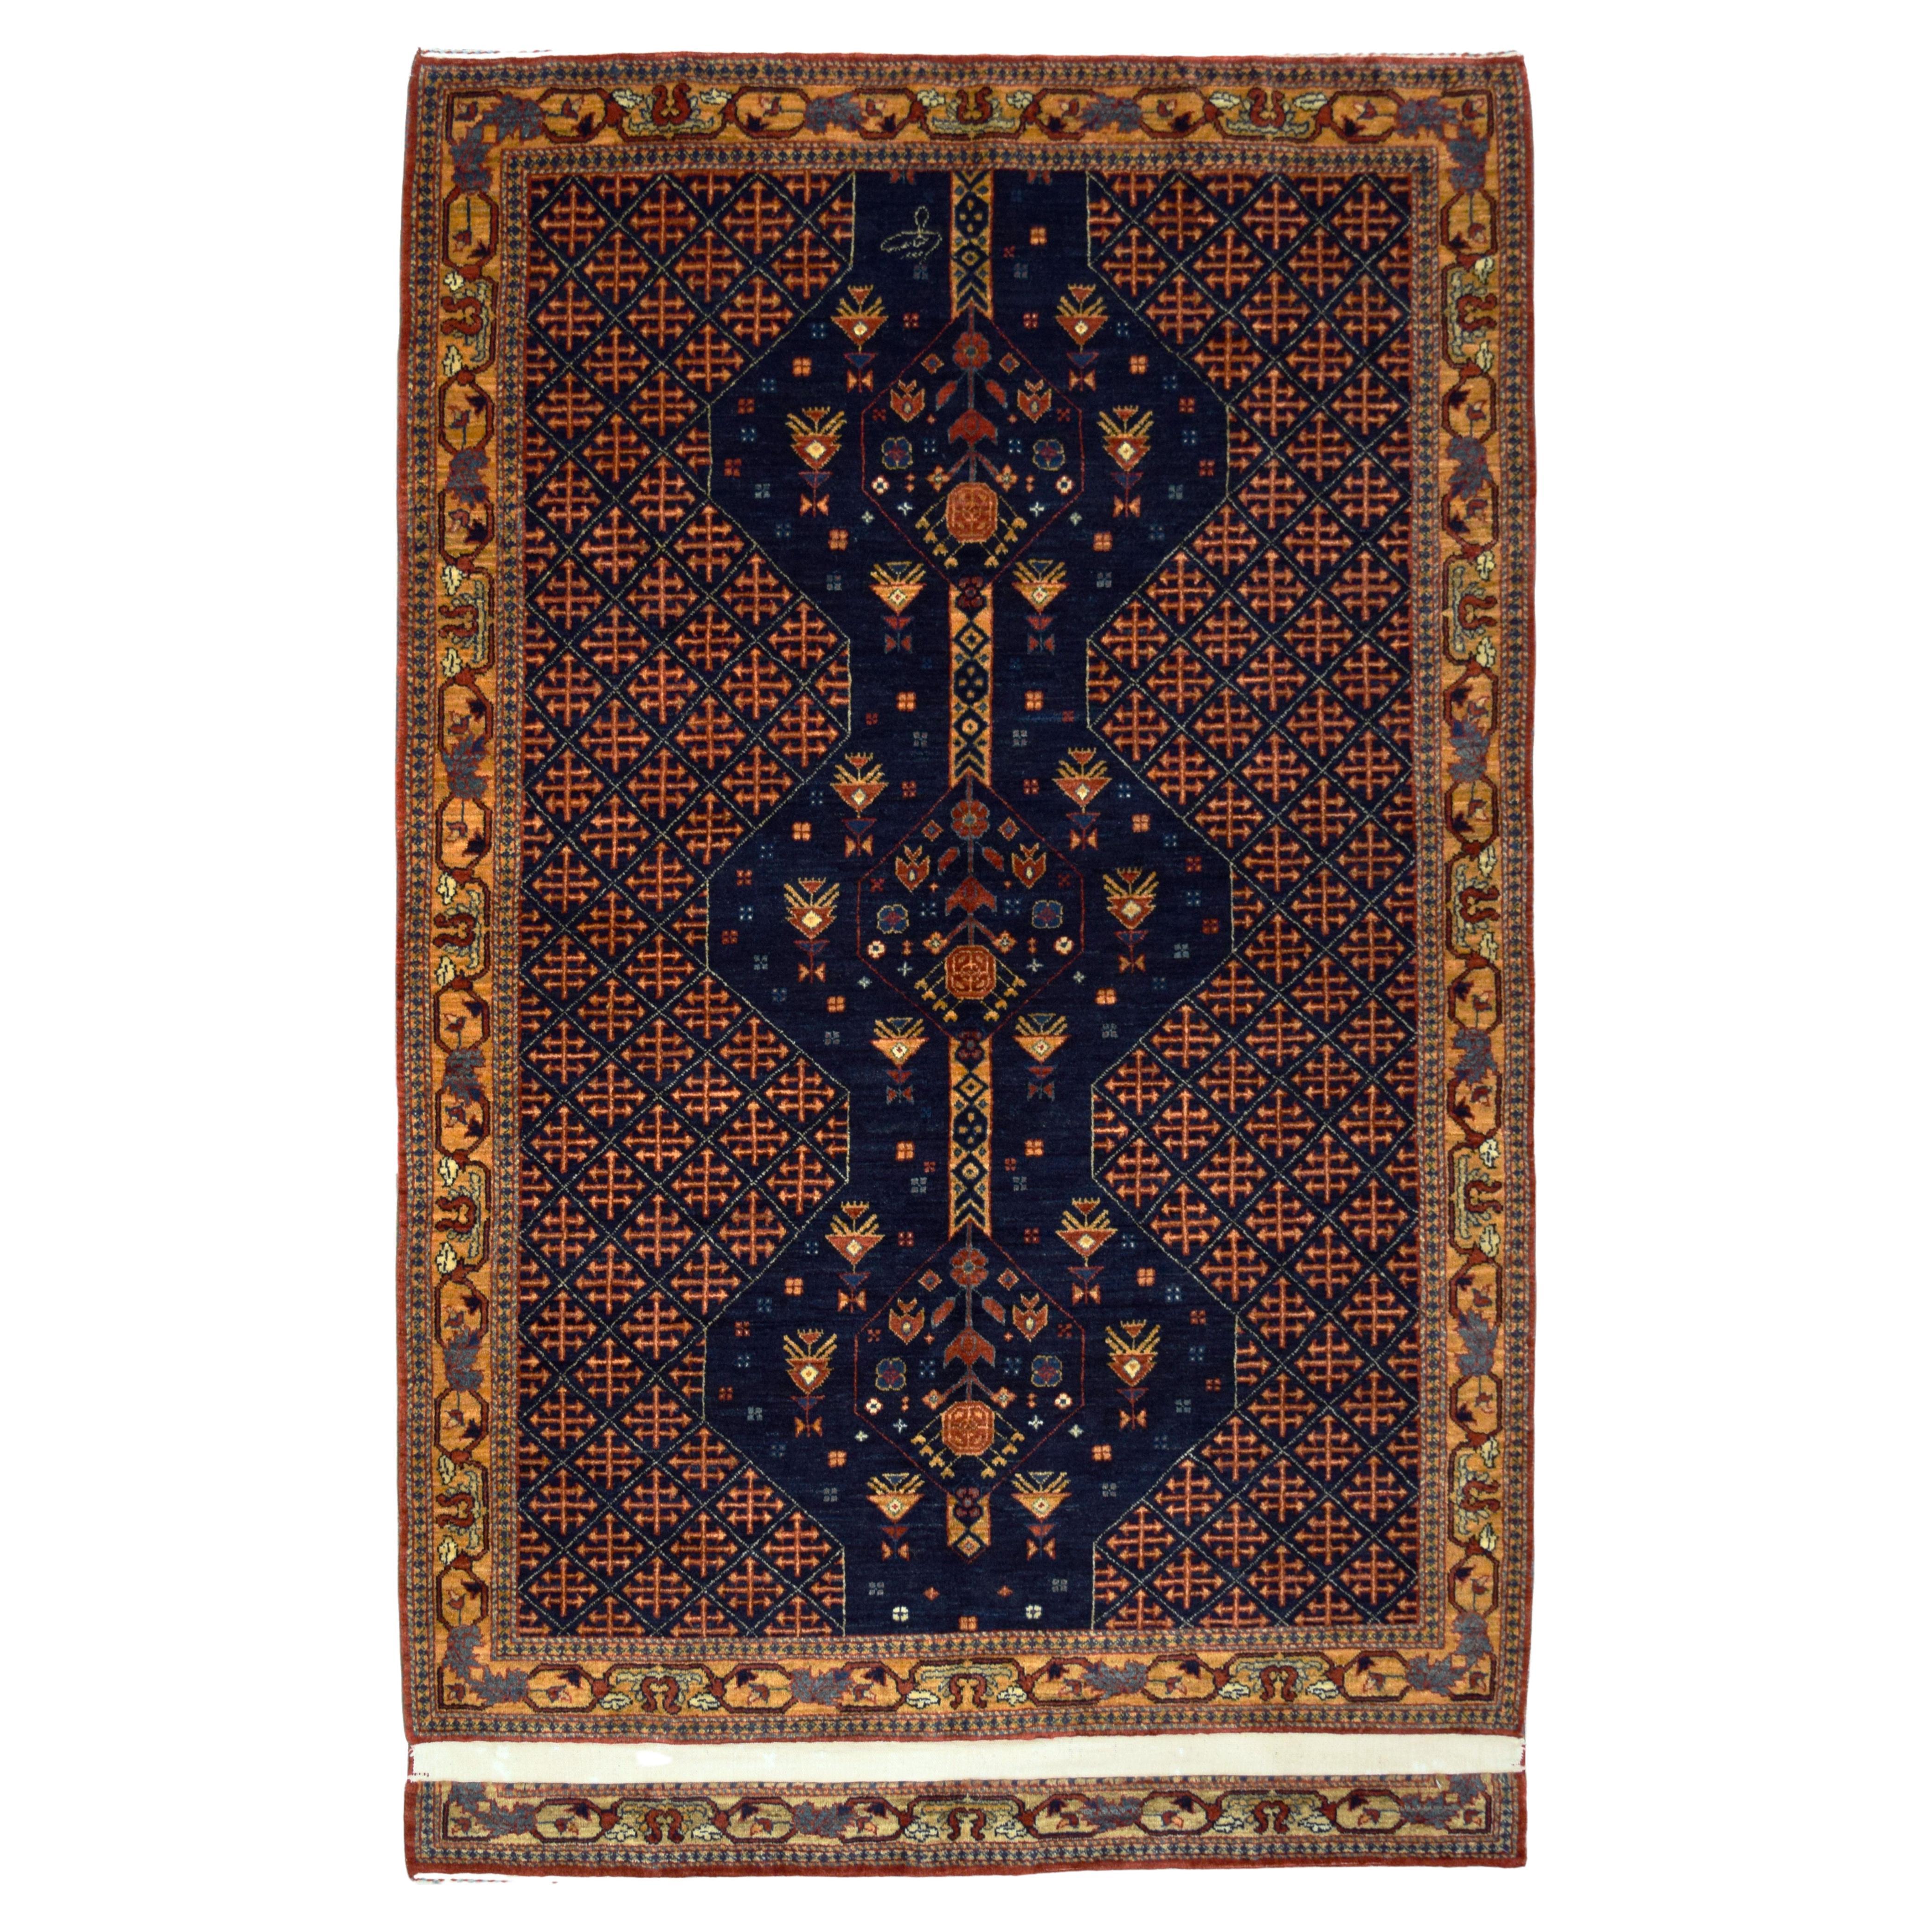 Qashqai Tribal Persian Rug in Indigo, Gold, Red, and Cream Wool, 4' x 6' For Sale